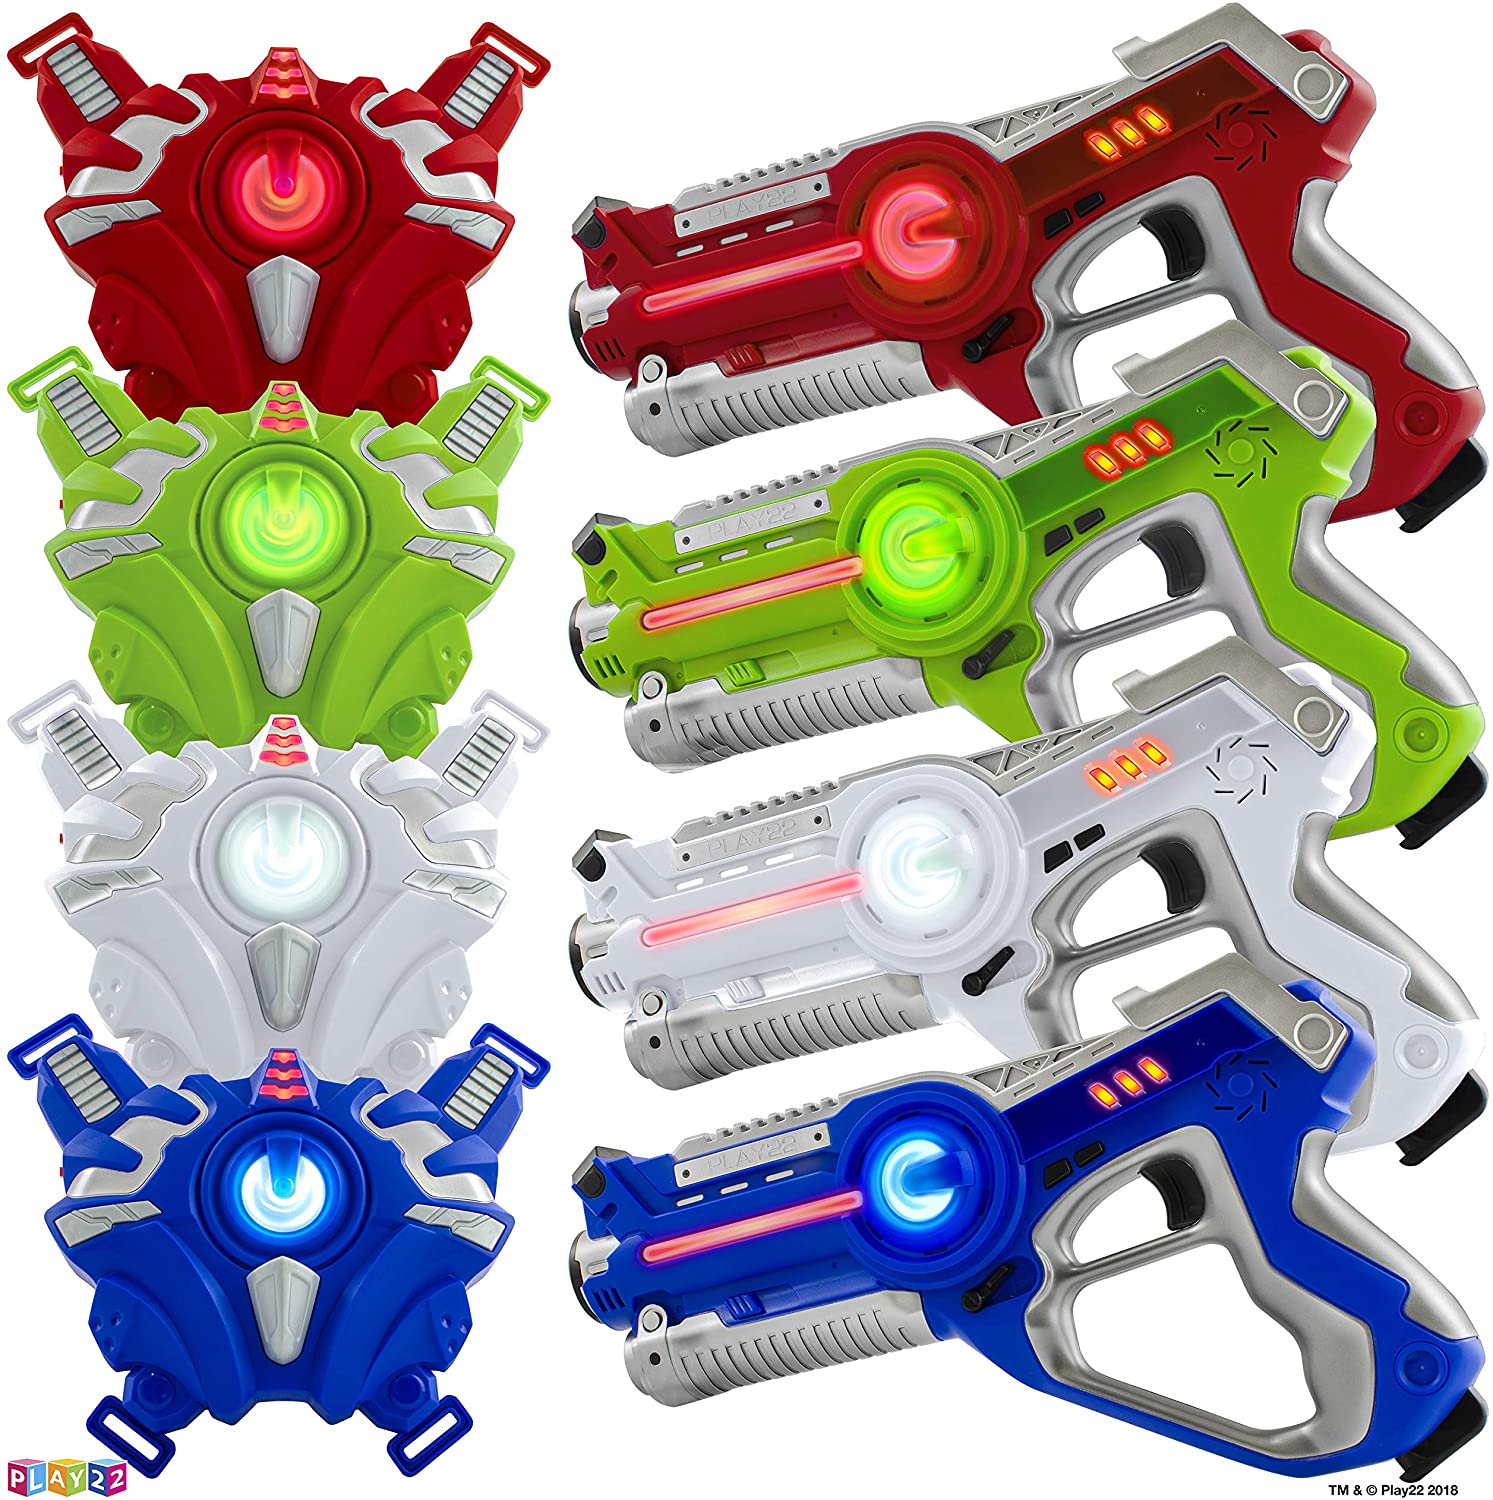 Play22 Infrared Laser Tag Set, 4-Pack